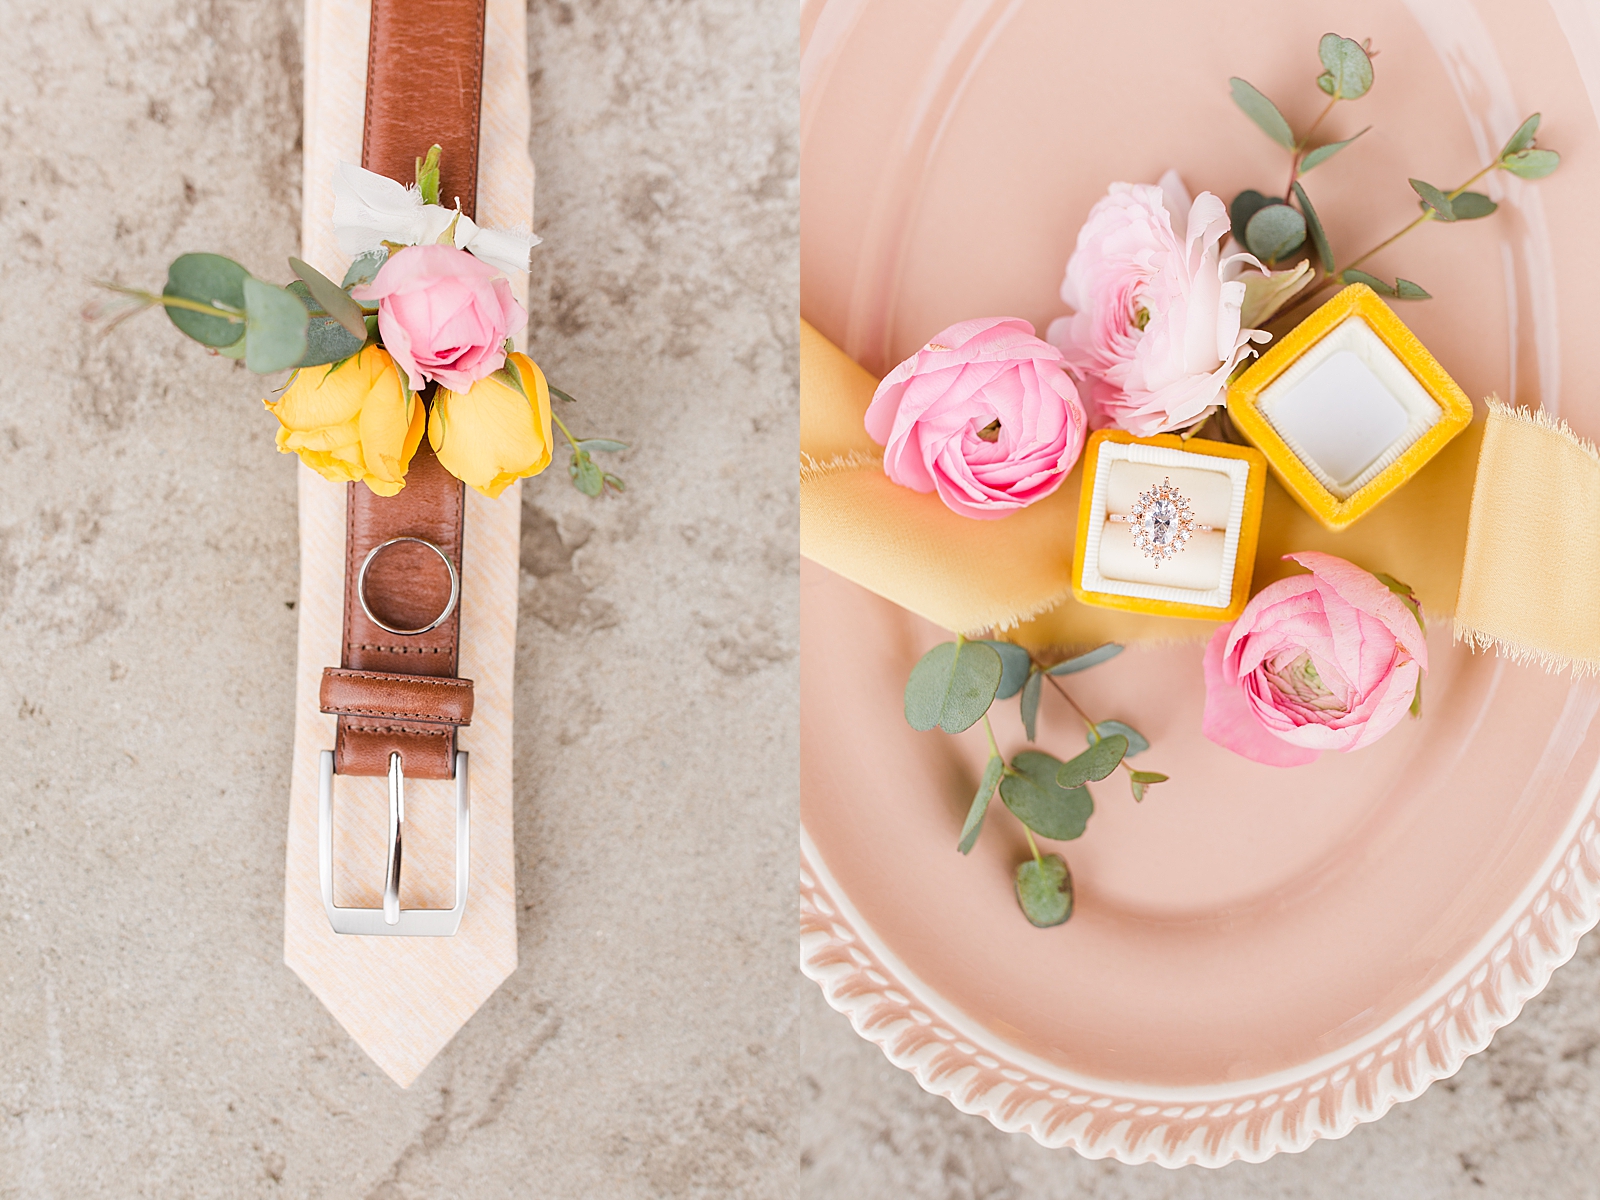 Hackney Warehouse Wedding Grooms Details tie belt and boutonnière on concrete floor and ring detail in yellow box with flowers Photos